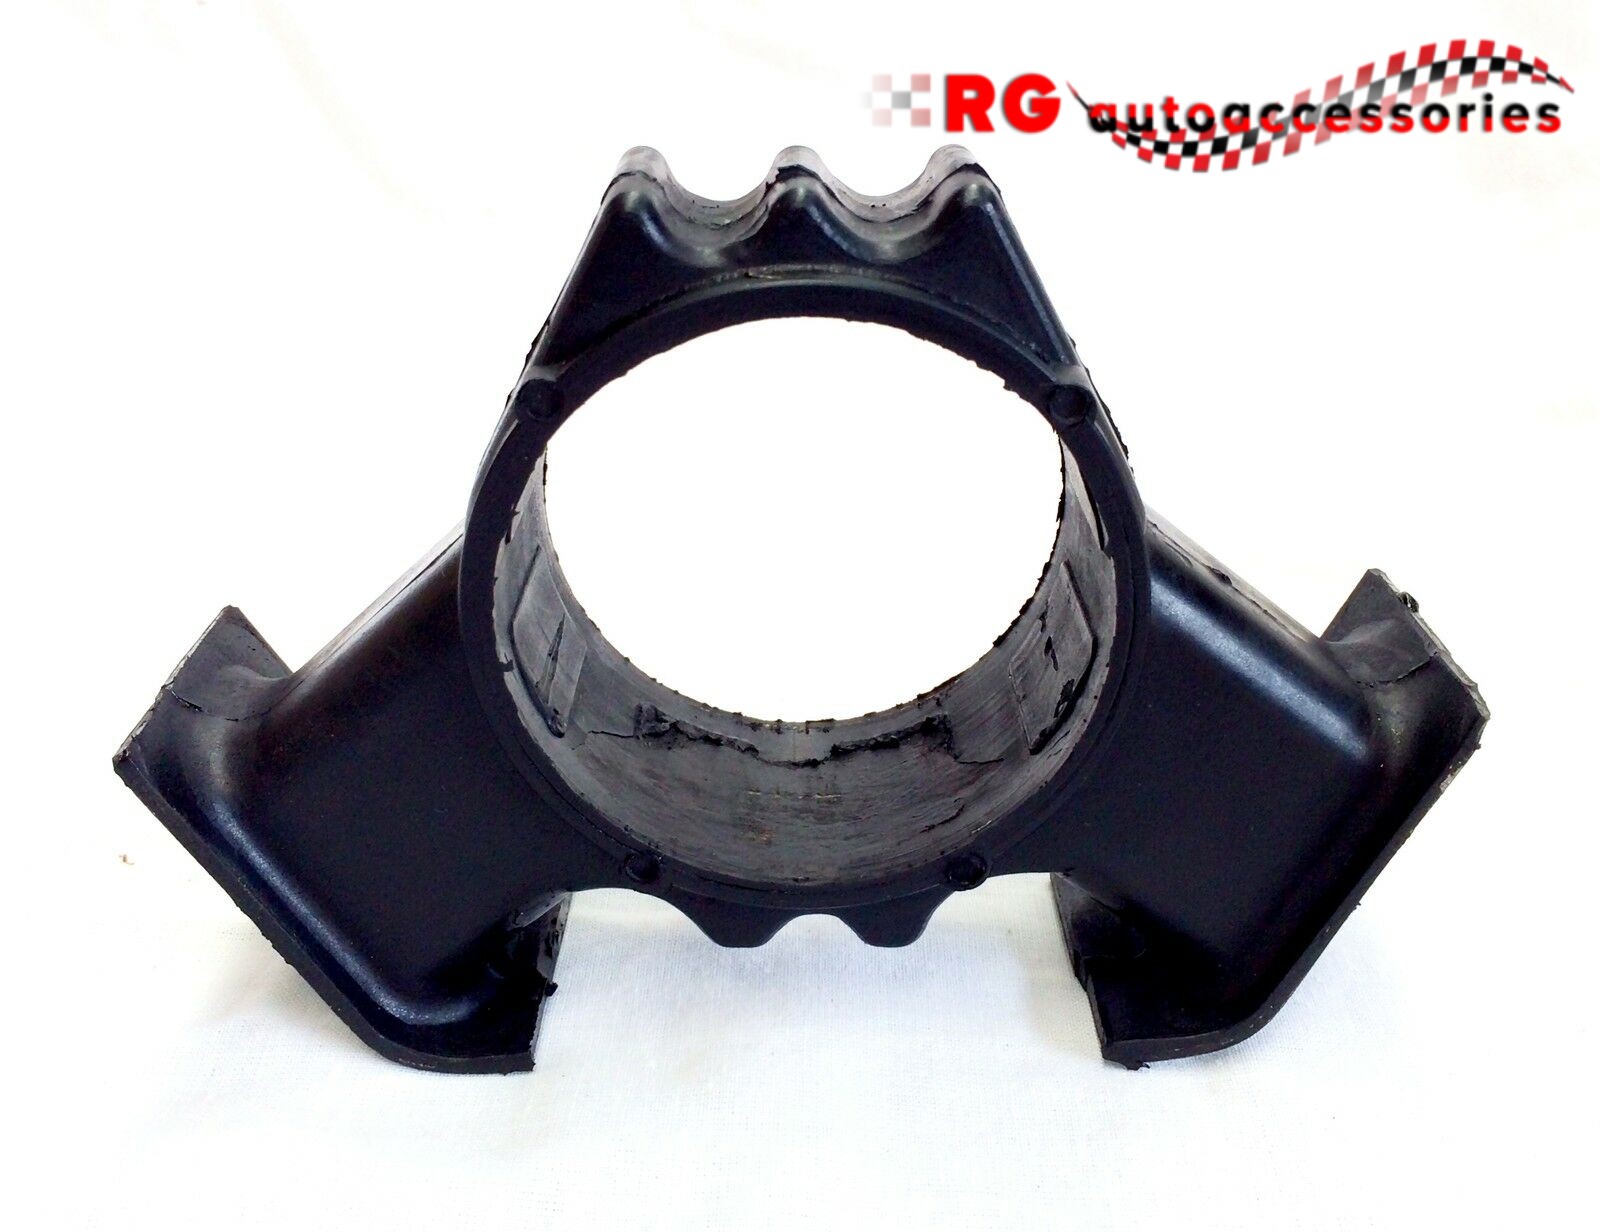 HOLDEN GEMINI COUPE SEDAN WAGON TX TC TD TE TF TAIL SHAFT CENTER RUBBER MOUNT WITH FREE FREIGHT